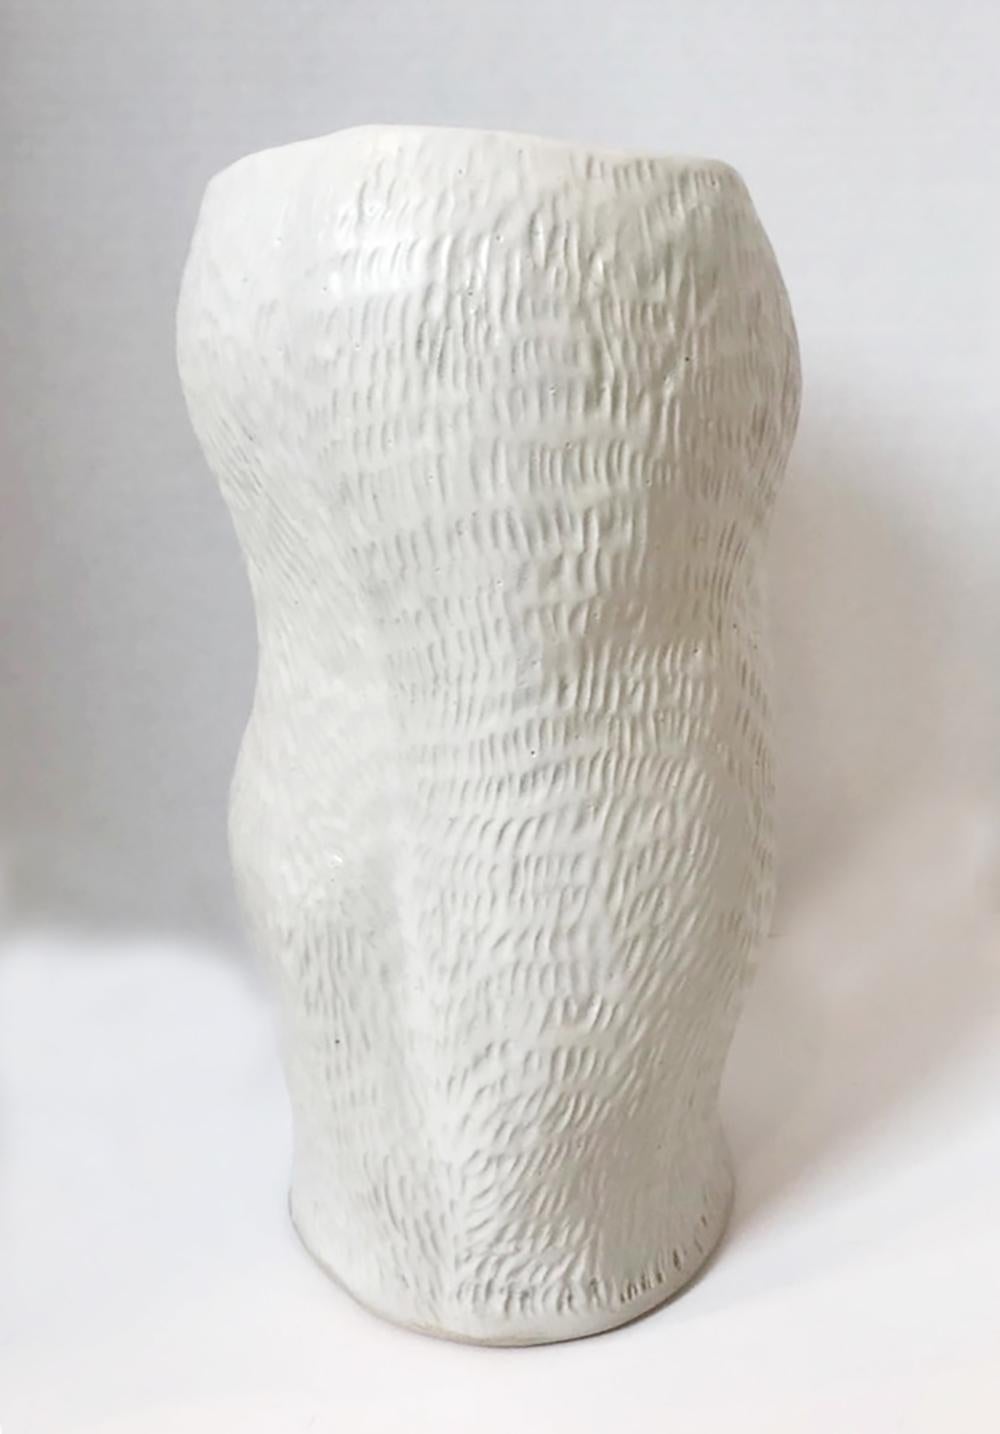 Trish DeMasi
Camille Vessel, 2020
Glazed Ceramic
13.5 x 6.5 x 6.5 in

Subtly textured with an undulating form, this white glazed ceramic vessel by Philadelphia artist Trish DeMasi is the perfect addition to a living room and could be completed with